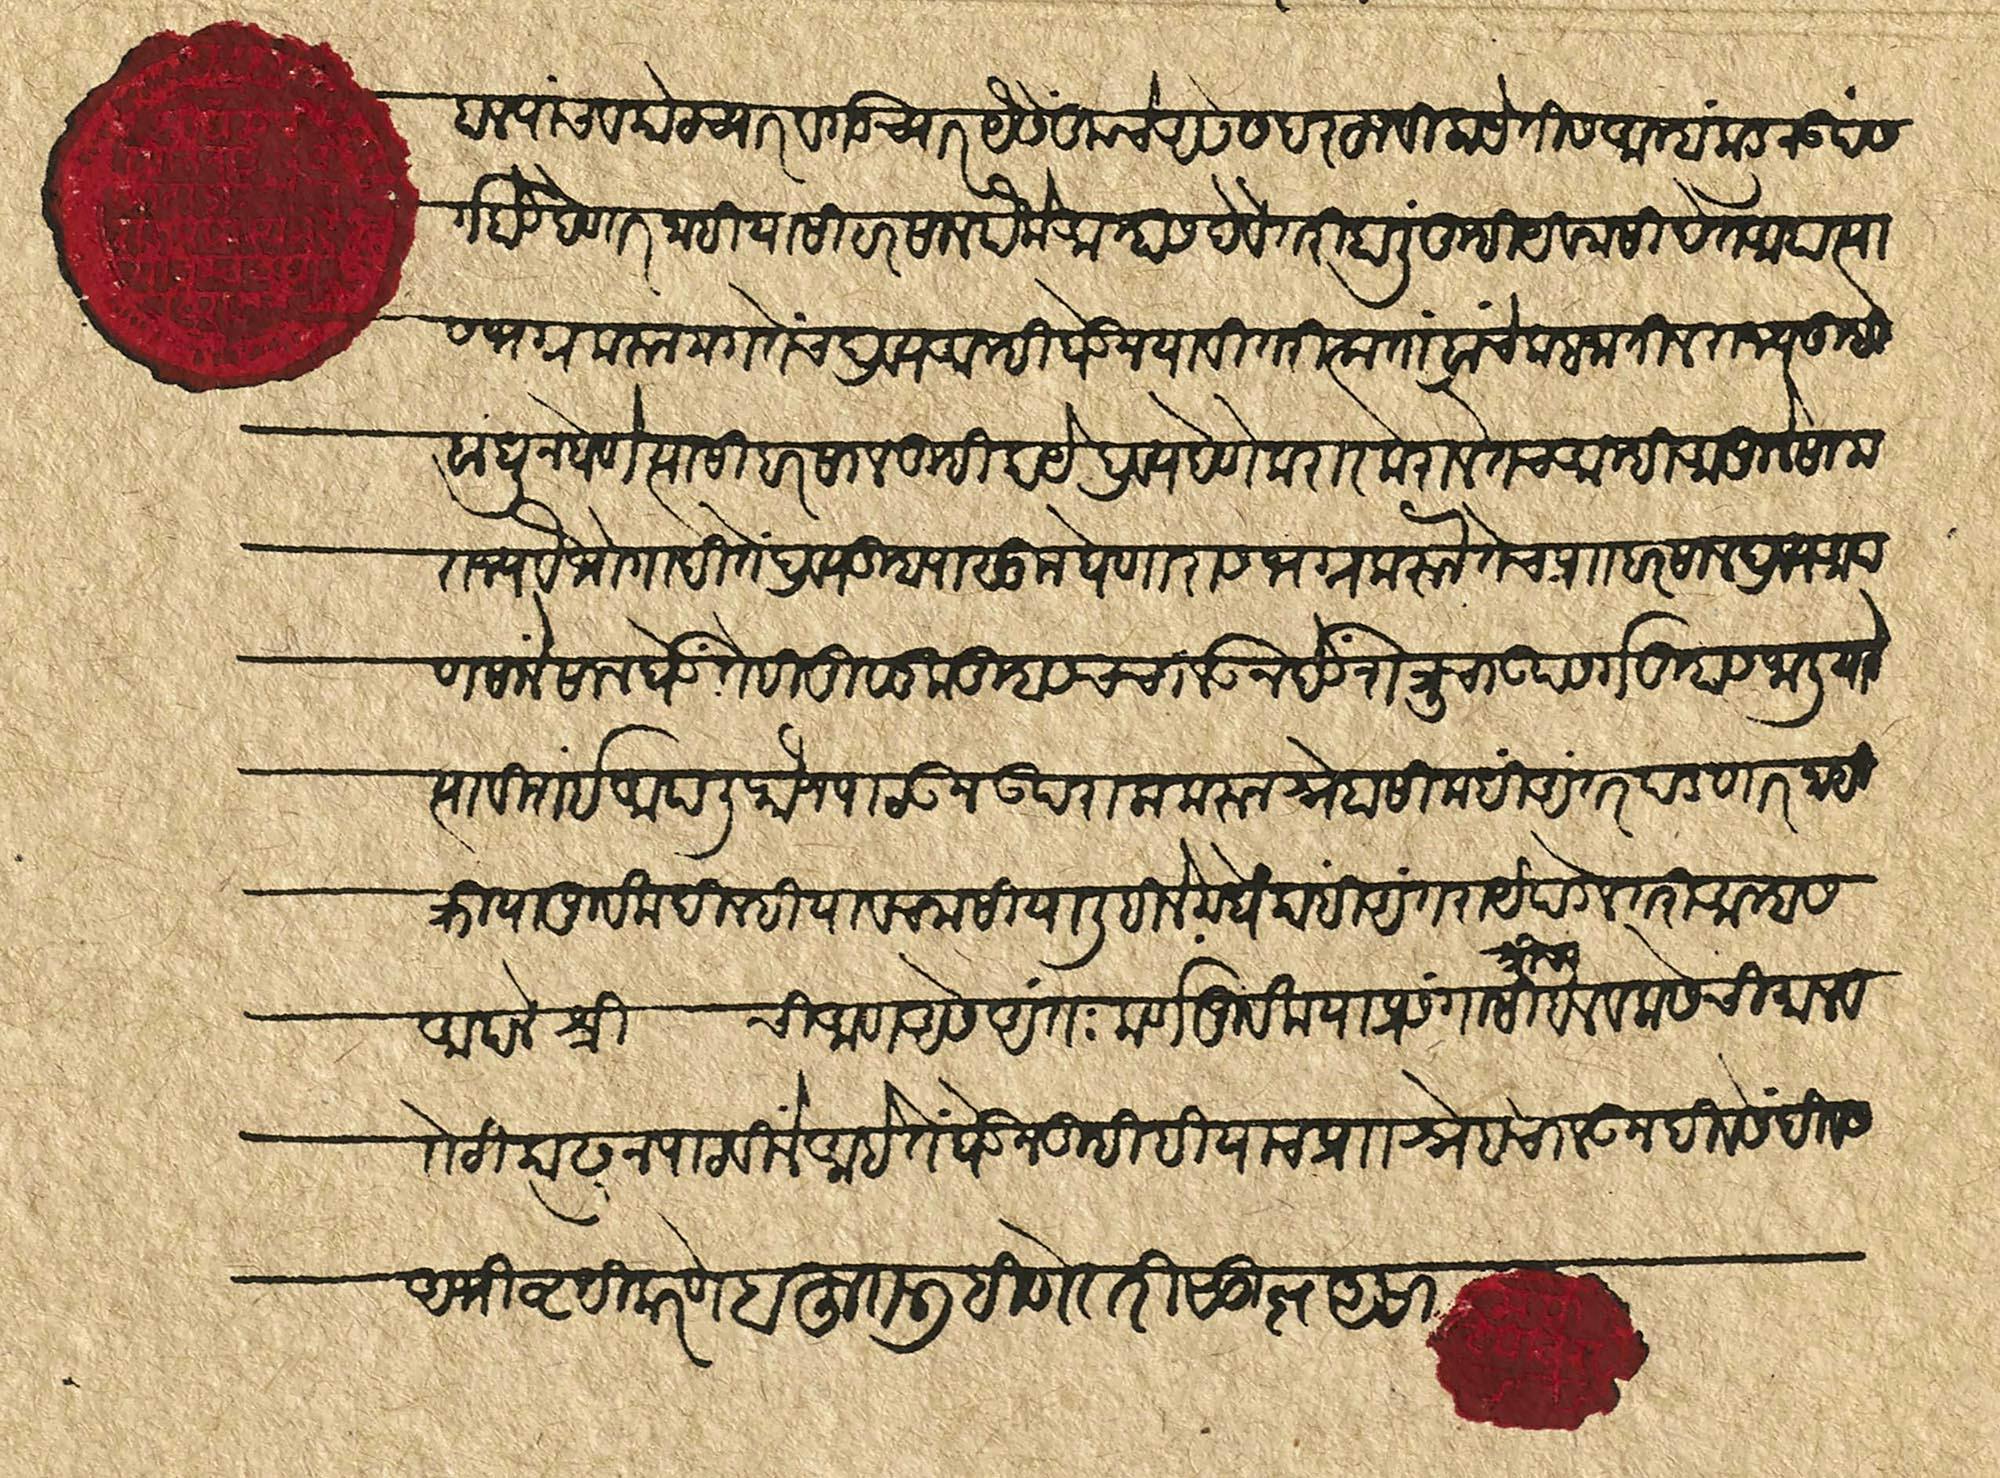 Sample of Moḍī writing from the Maratha kingdom, 1696 CE